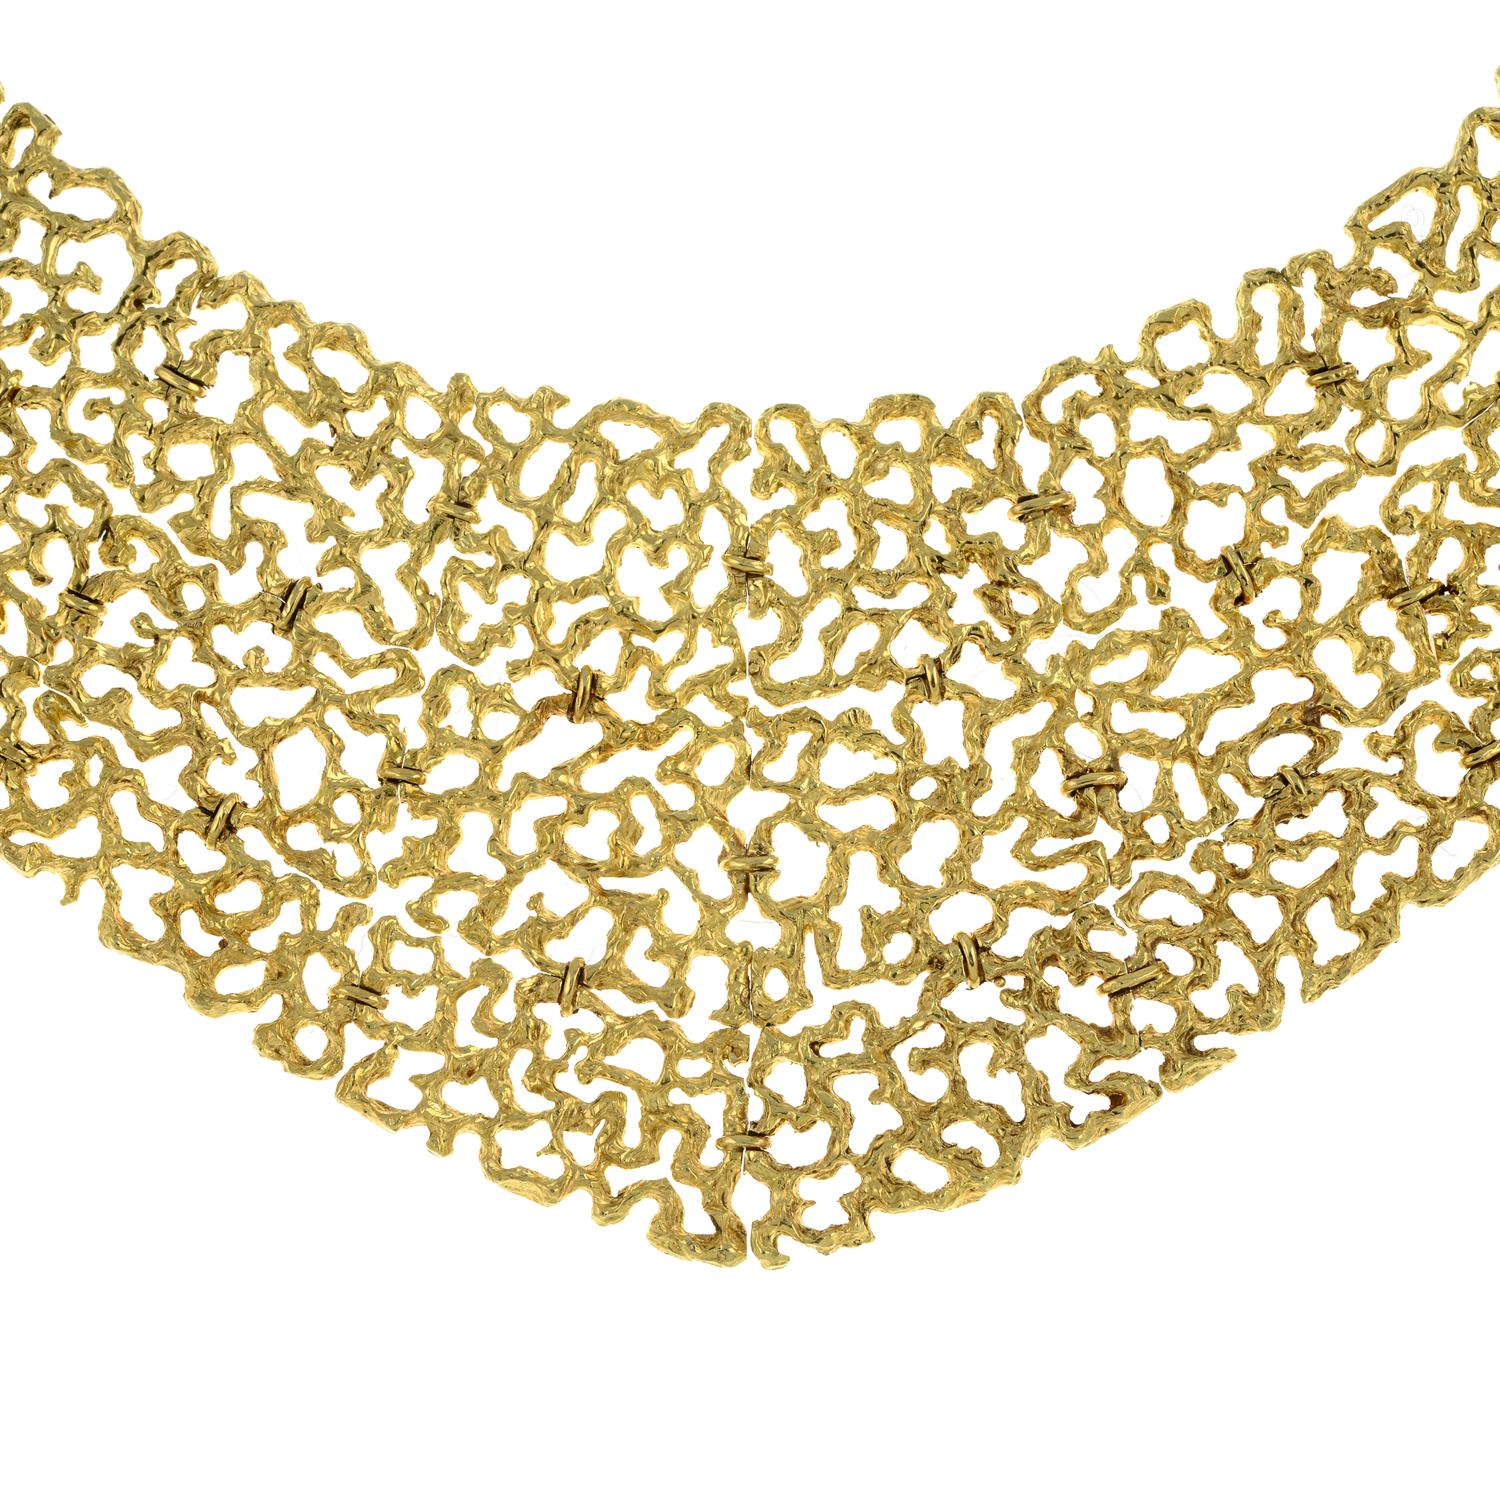 Gold necklace, possibly Gilbert Albert for Omega - Image 3 of 6